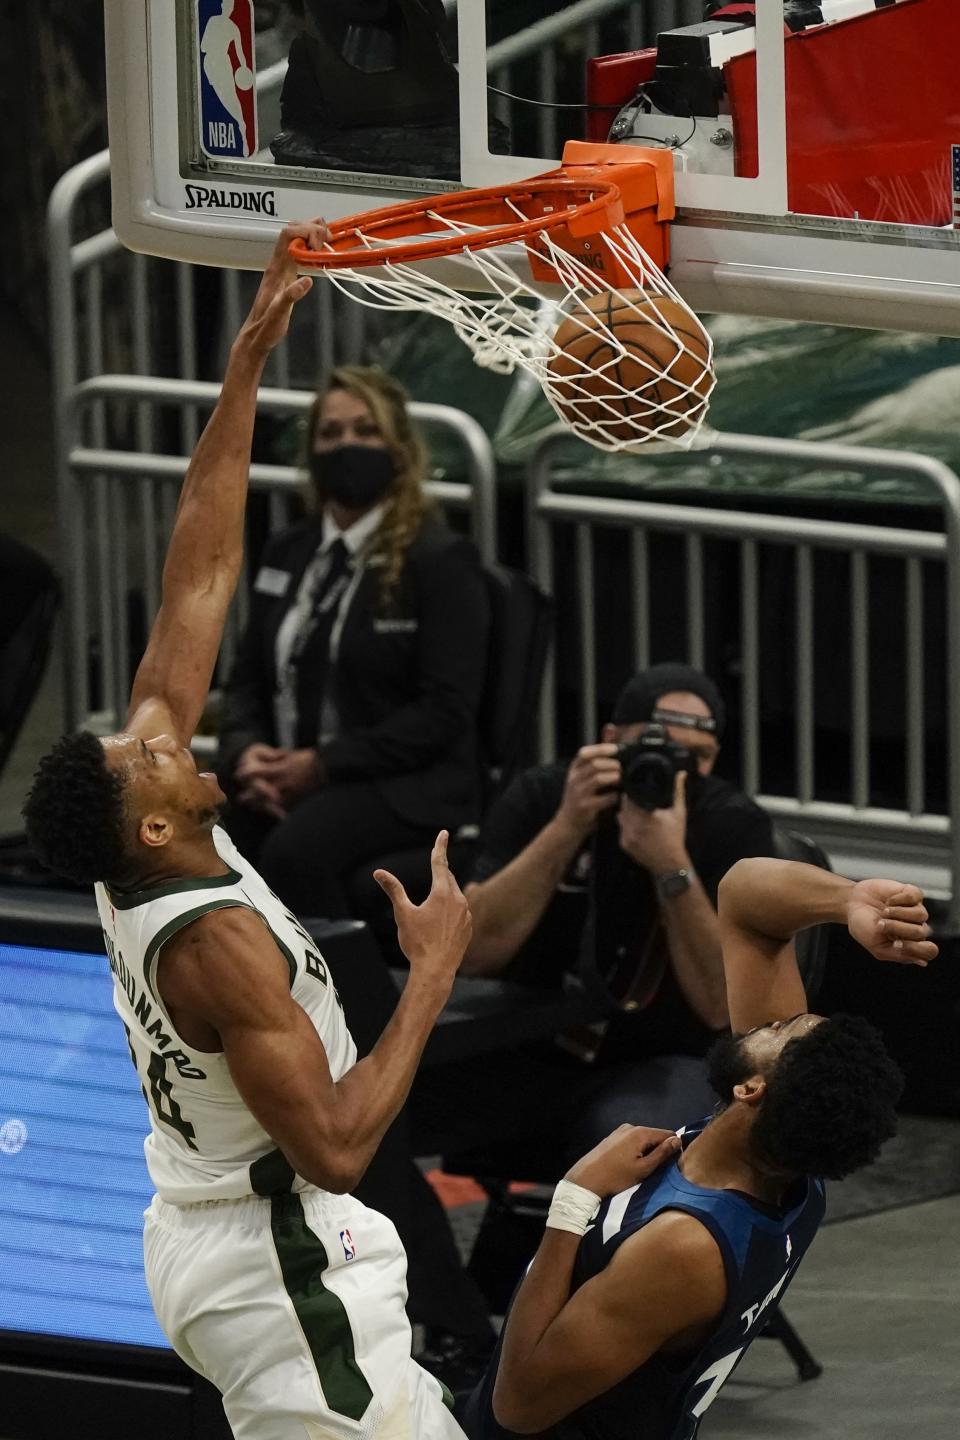 Milwaukee Bucks' Giannis Antetokounmpo dunks over Minnesota Timberwolves' Karl-Anthony Towns during the first half of an NBA basketball game Tuesday, Feb. 23, 2021, in Milwaukee. (AP Photo/Morry Gash)